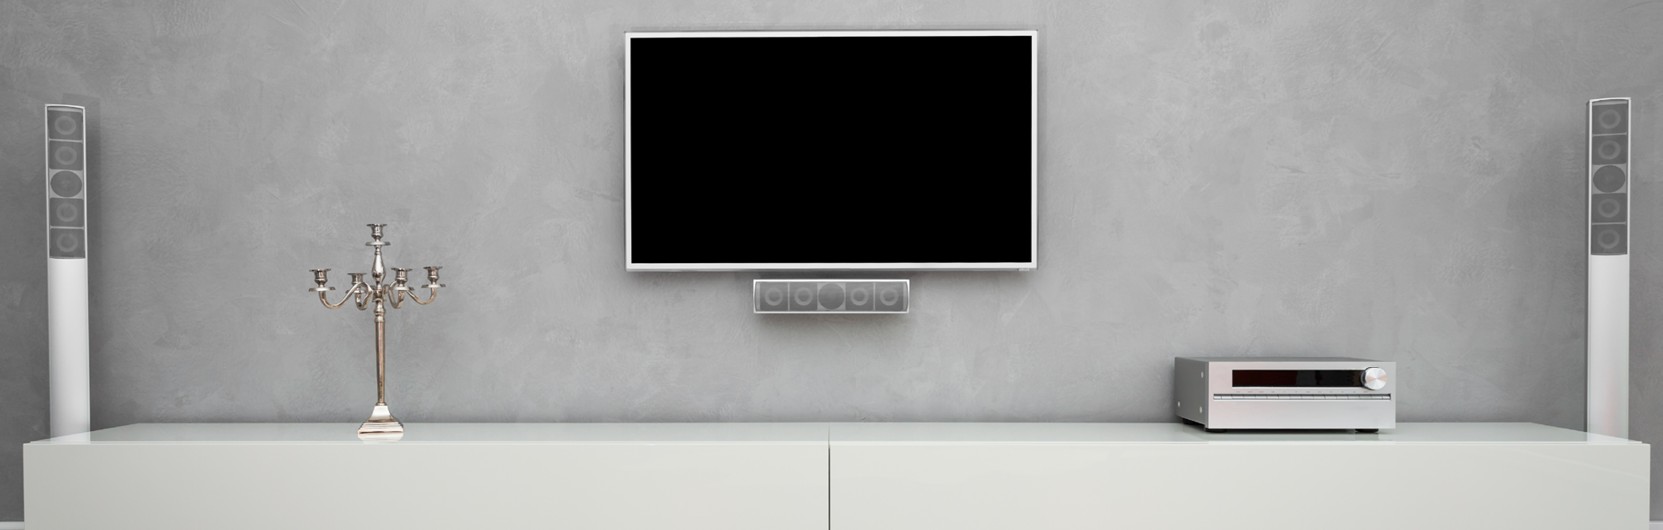 Electrical-kitchen_tv